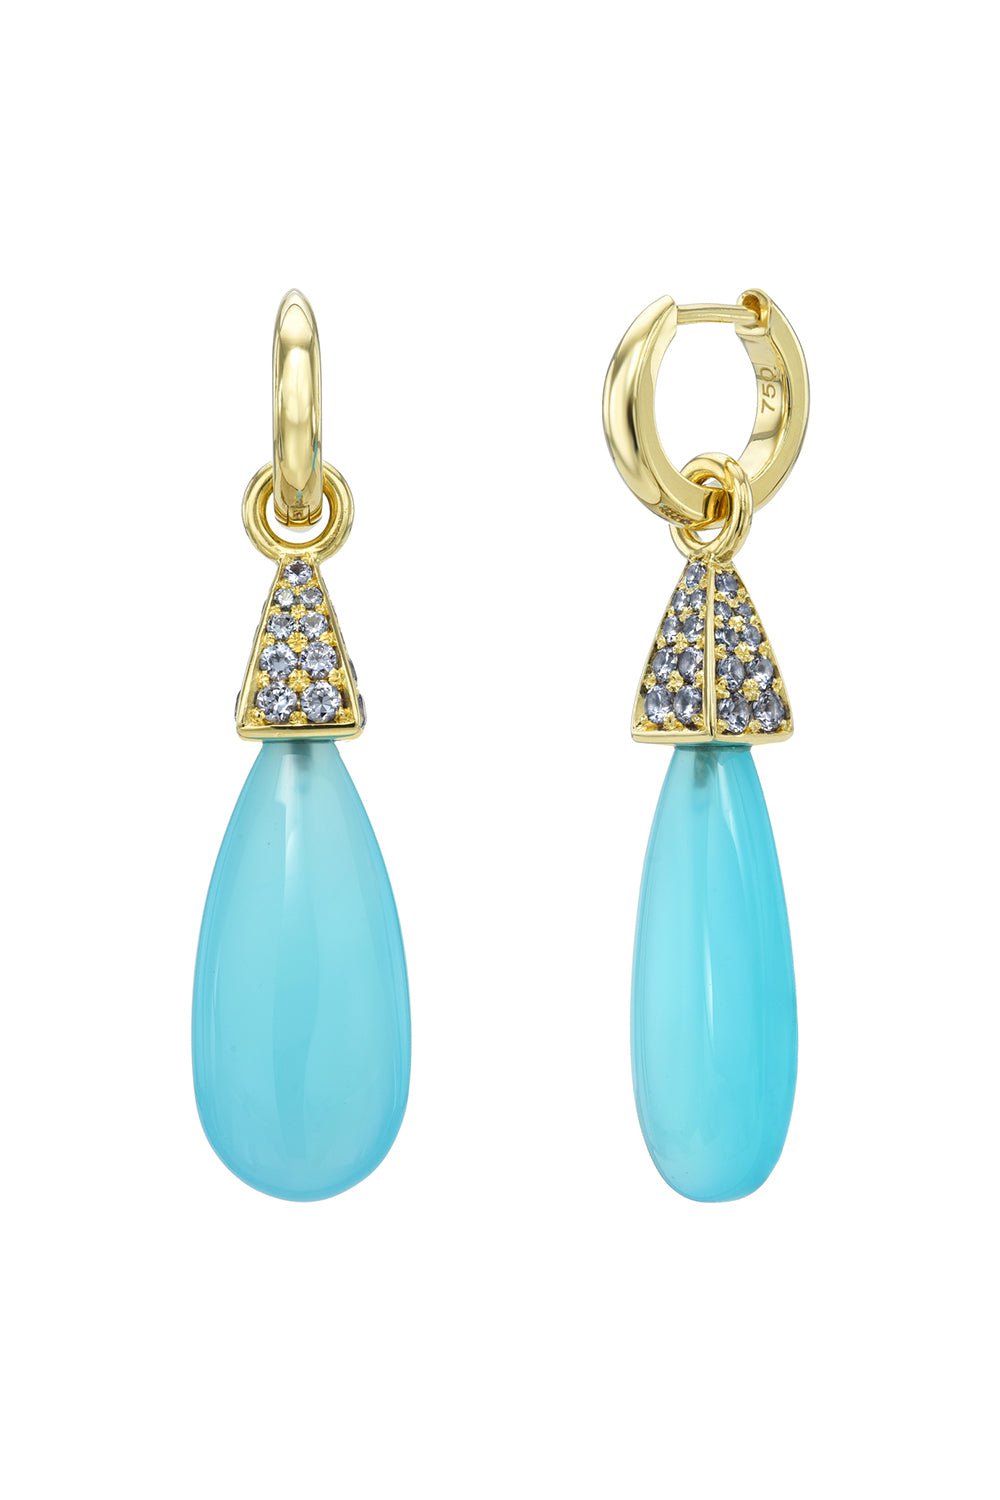 MEREDITH YOUNG-Cosmic Bloom Huggie Pave Drop Earrings-YELLOW GOLD